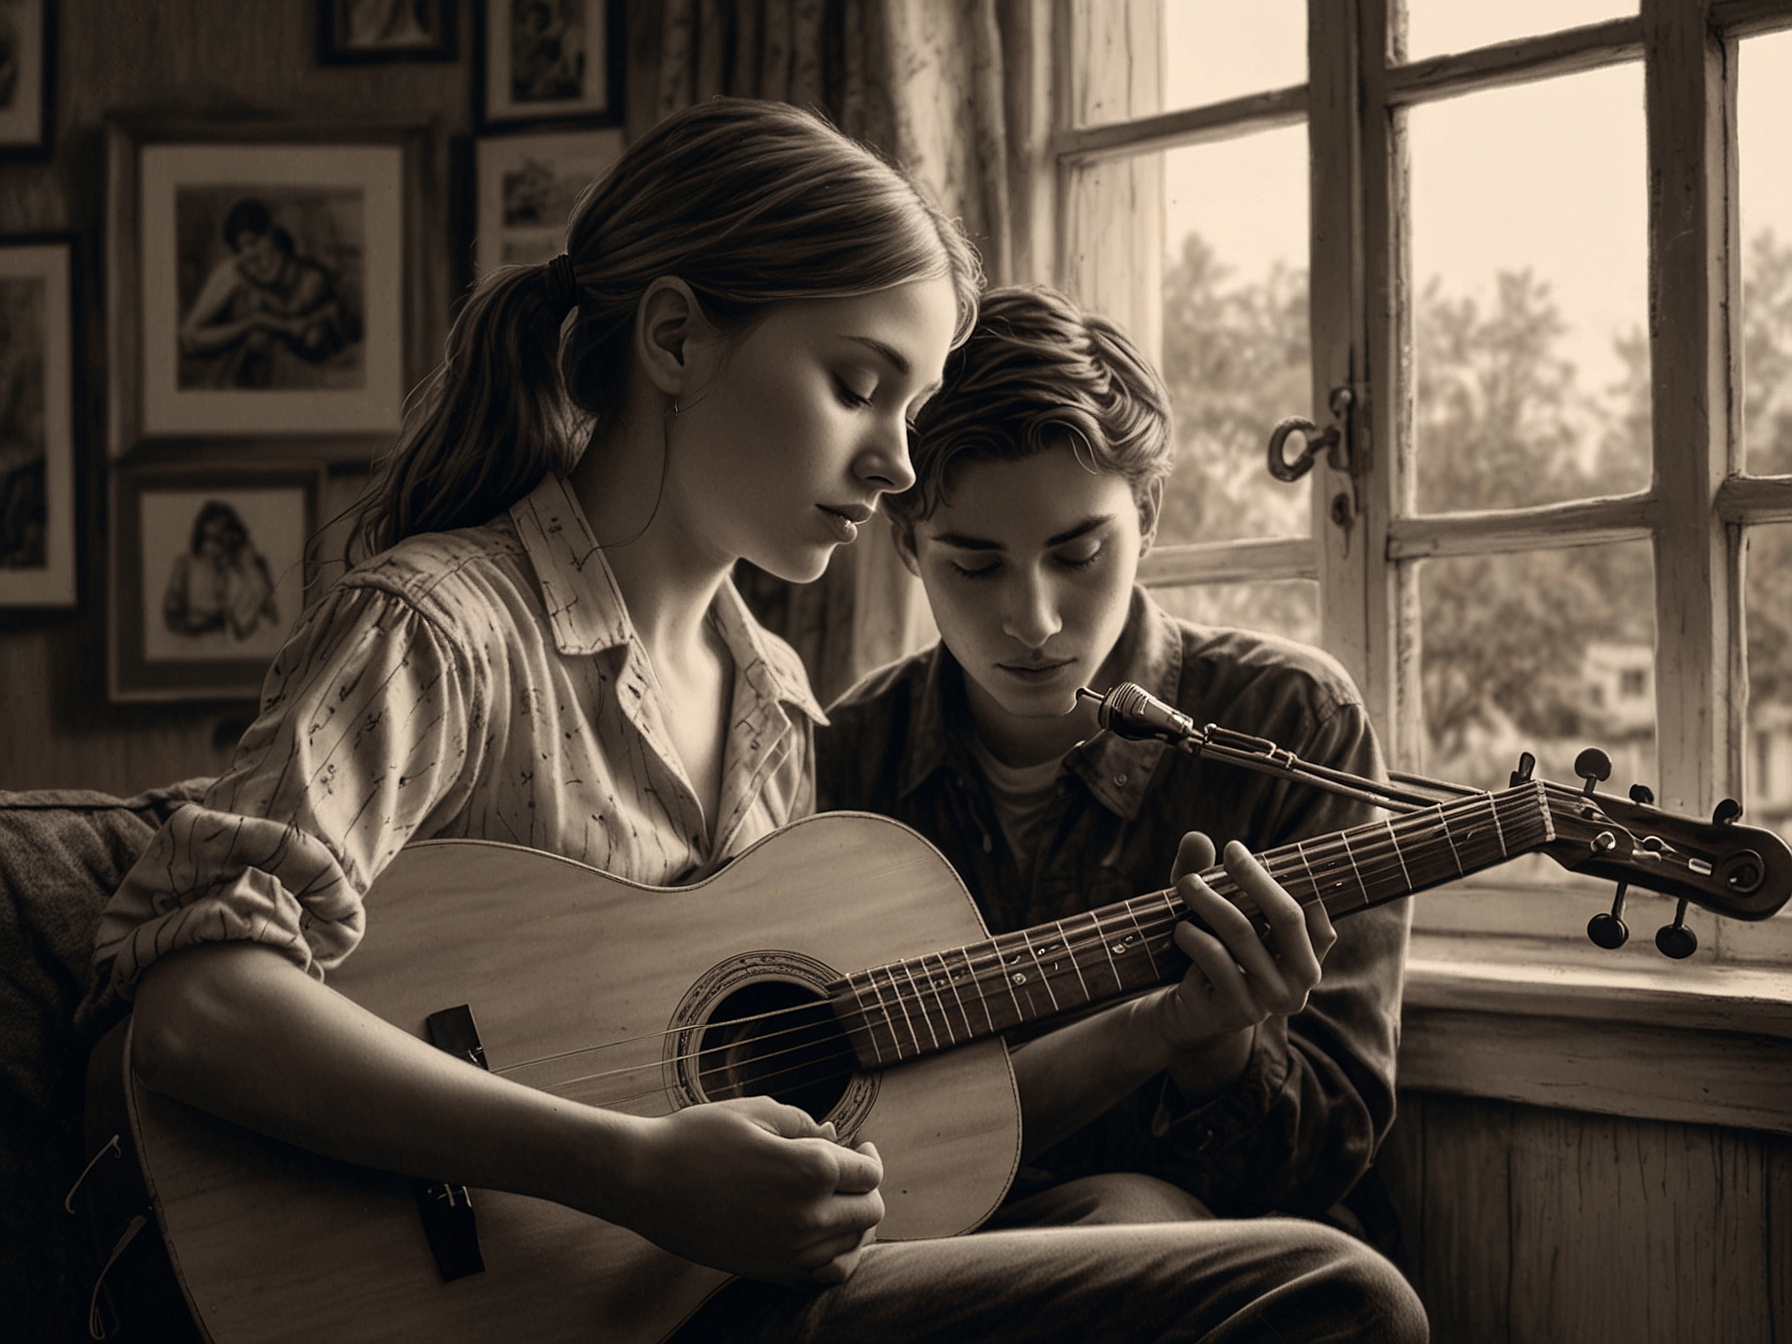 A scene from 'Heart Strings' where two young musicians, from different backgrounds, share a heartfelt moment playing music together, underscoring the film's themes of love and ambition.